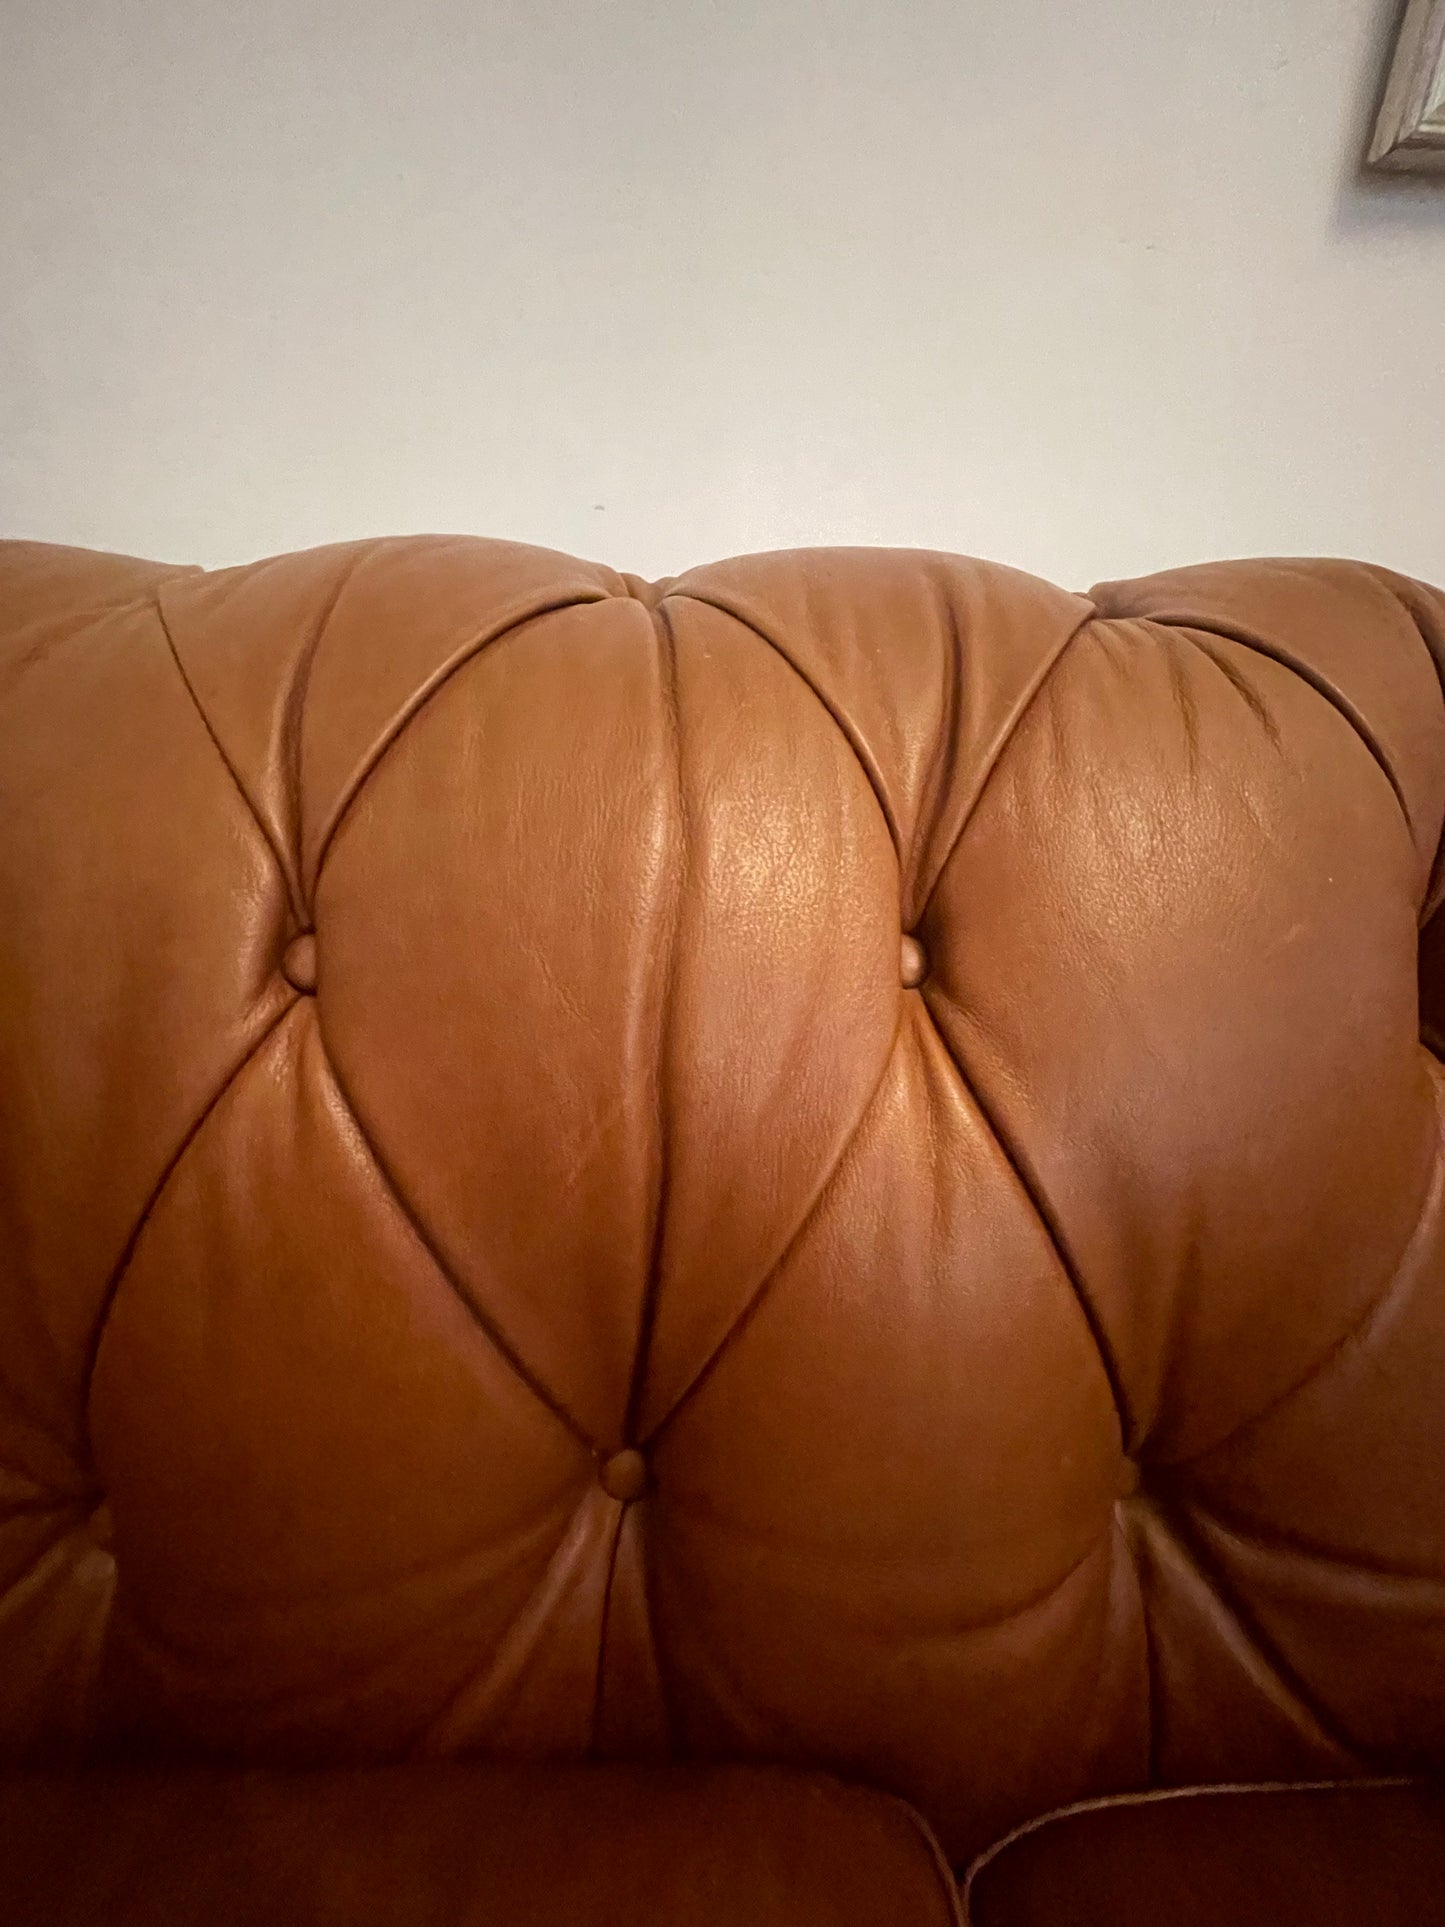 Vintage Button Back Rolled Arm Leather Chesterfield Sofa